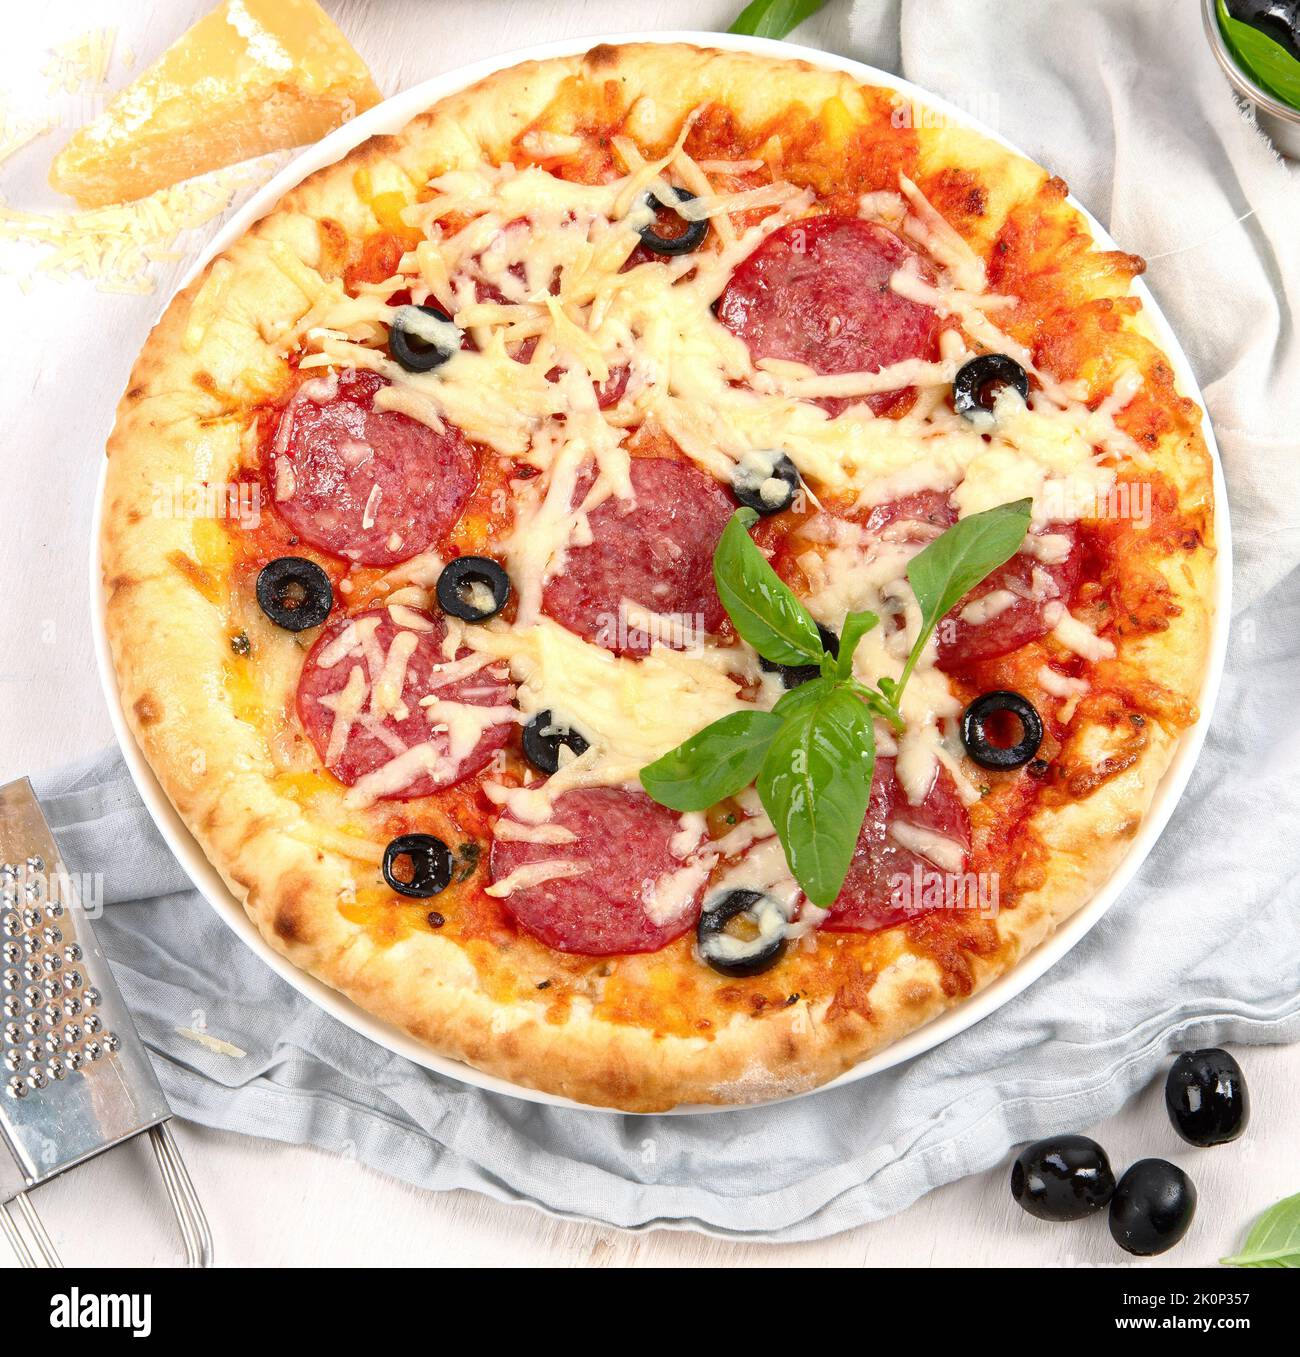 Freshly baked pizza on dark background. Tasty homemade food concept. Top view, copy space Stock Photo